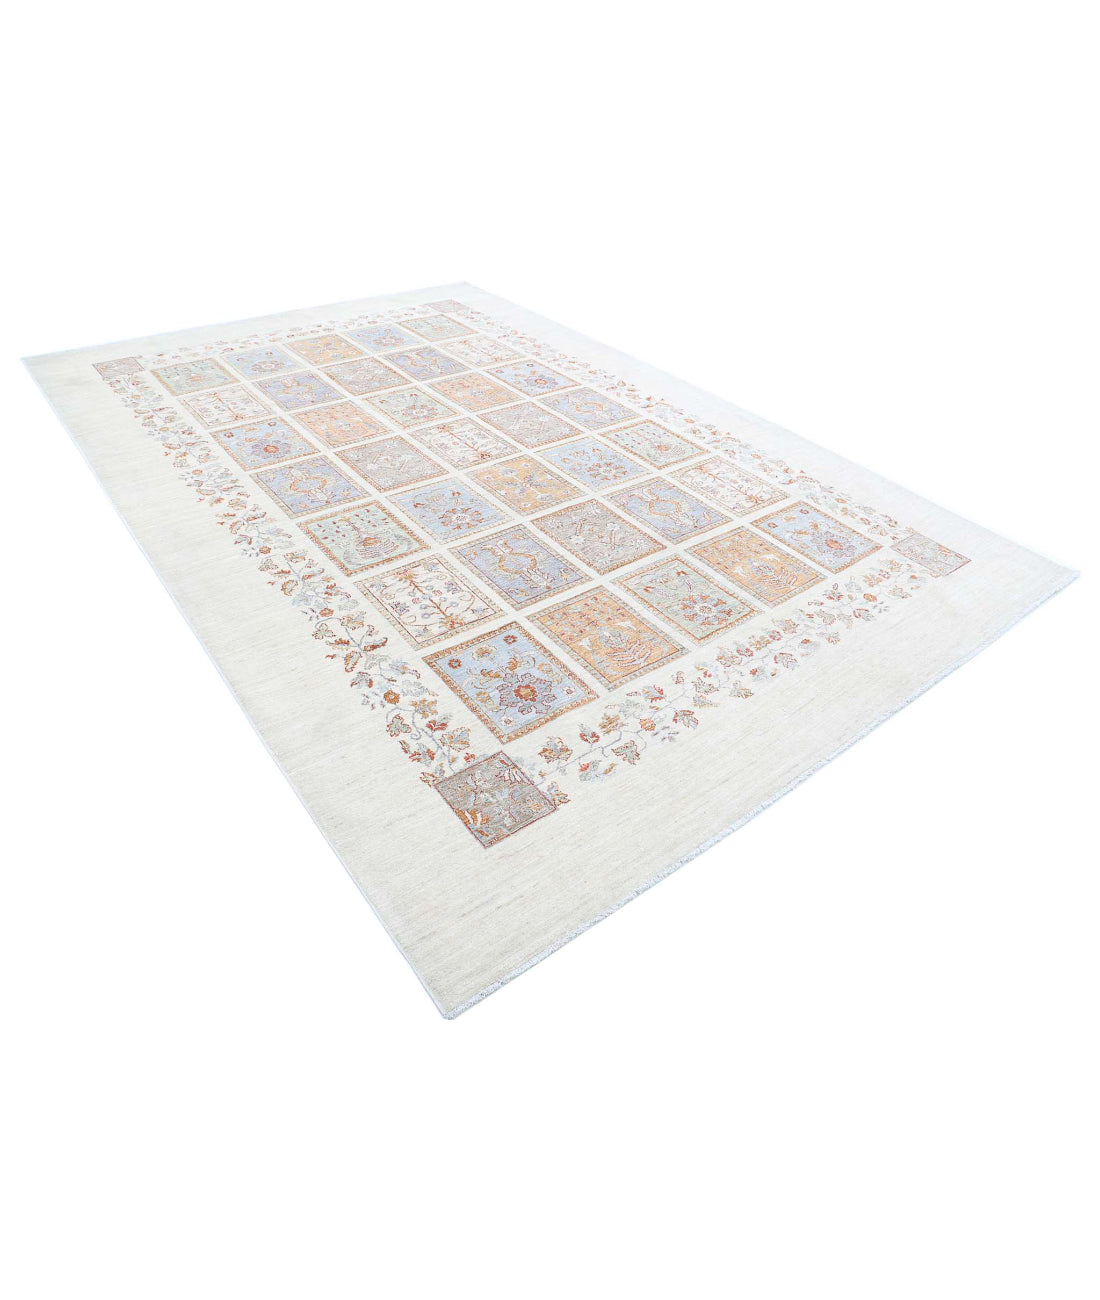 Serenity 8'1'' X 11'10'' Hand-Knotted Wool Rug 8'1'' x 11'10'' (243 X 355) / Ivory / Grey